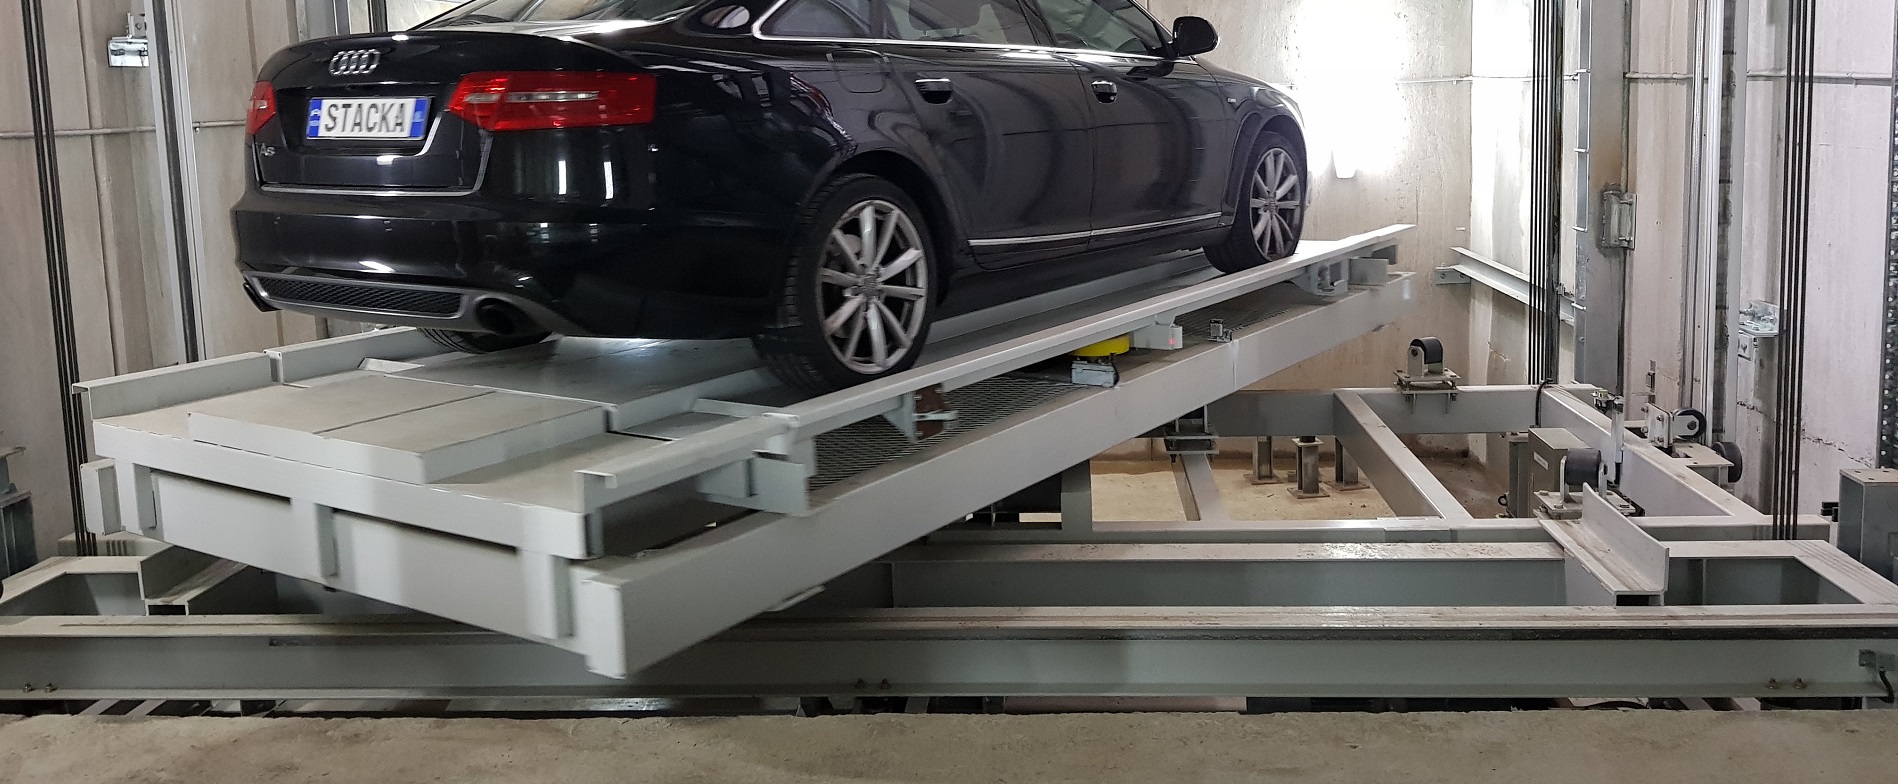 Why Choose Hercules Carparking Systems?